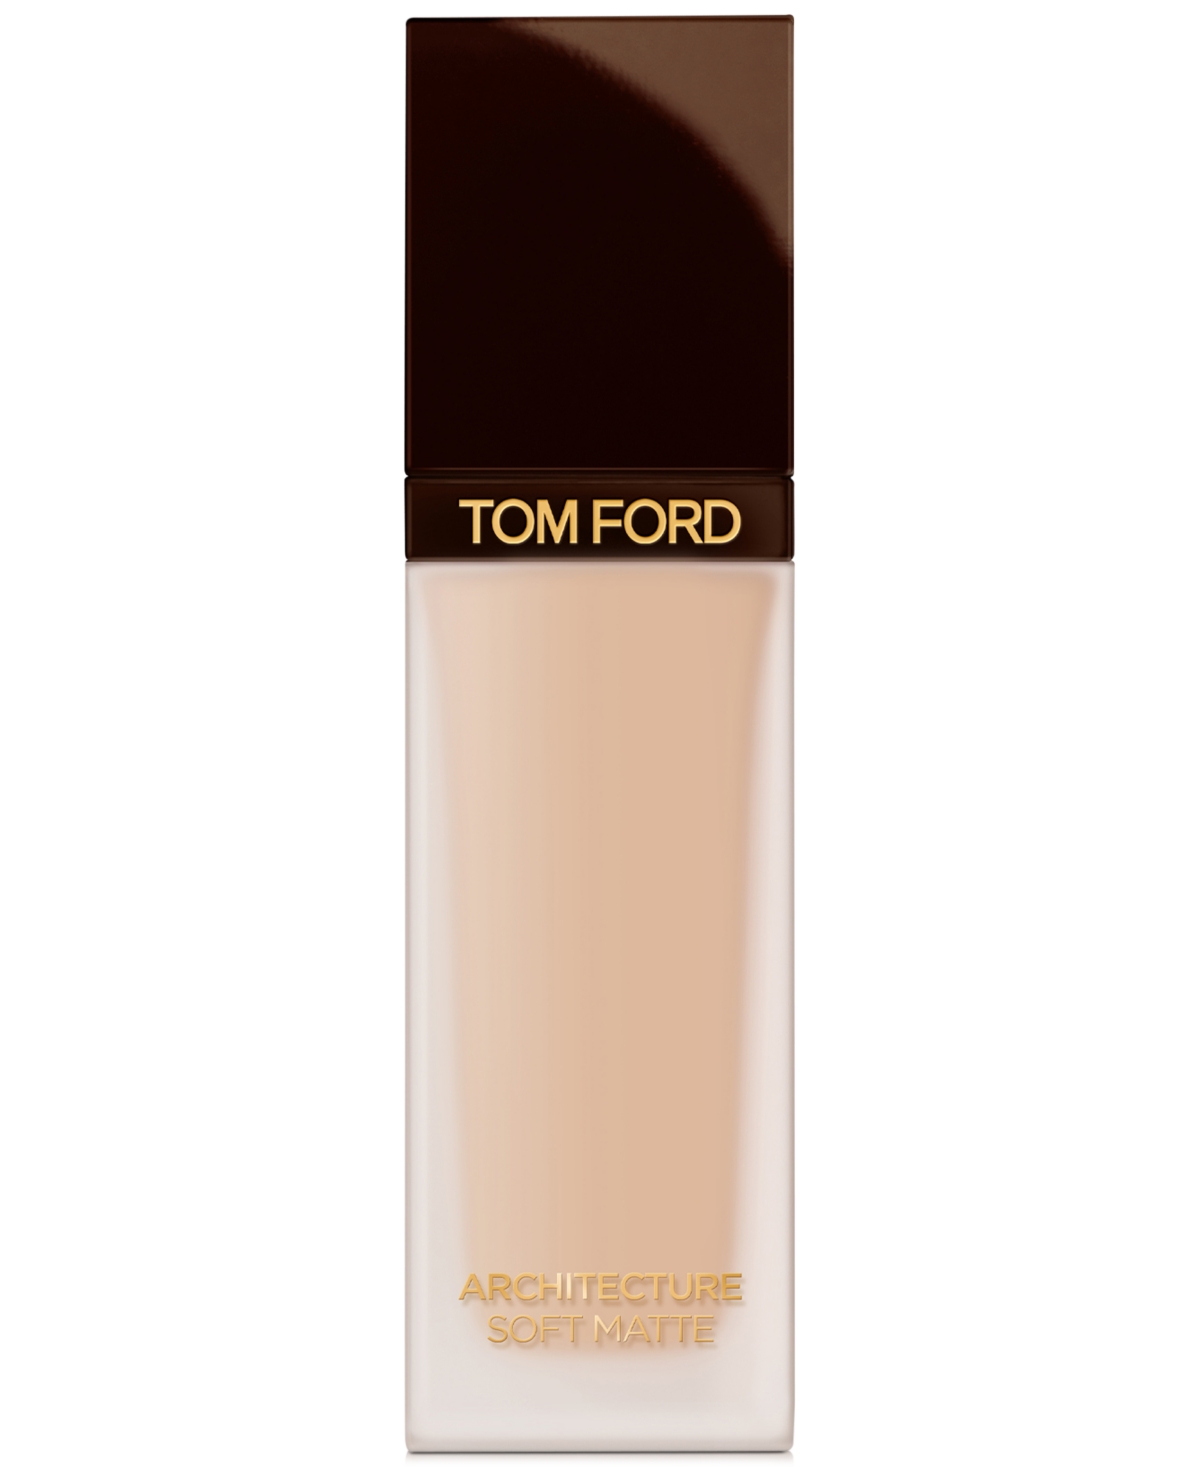 Shop Tom Ford Architecture Soft Matte Blurring Foundation In . Nude Ivory - Fair Light